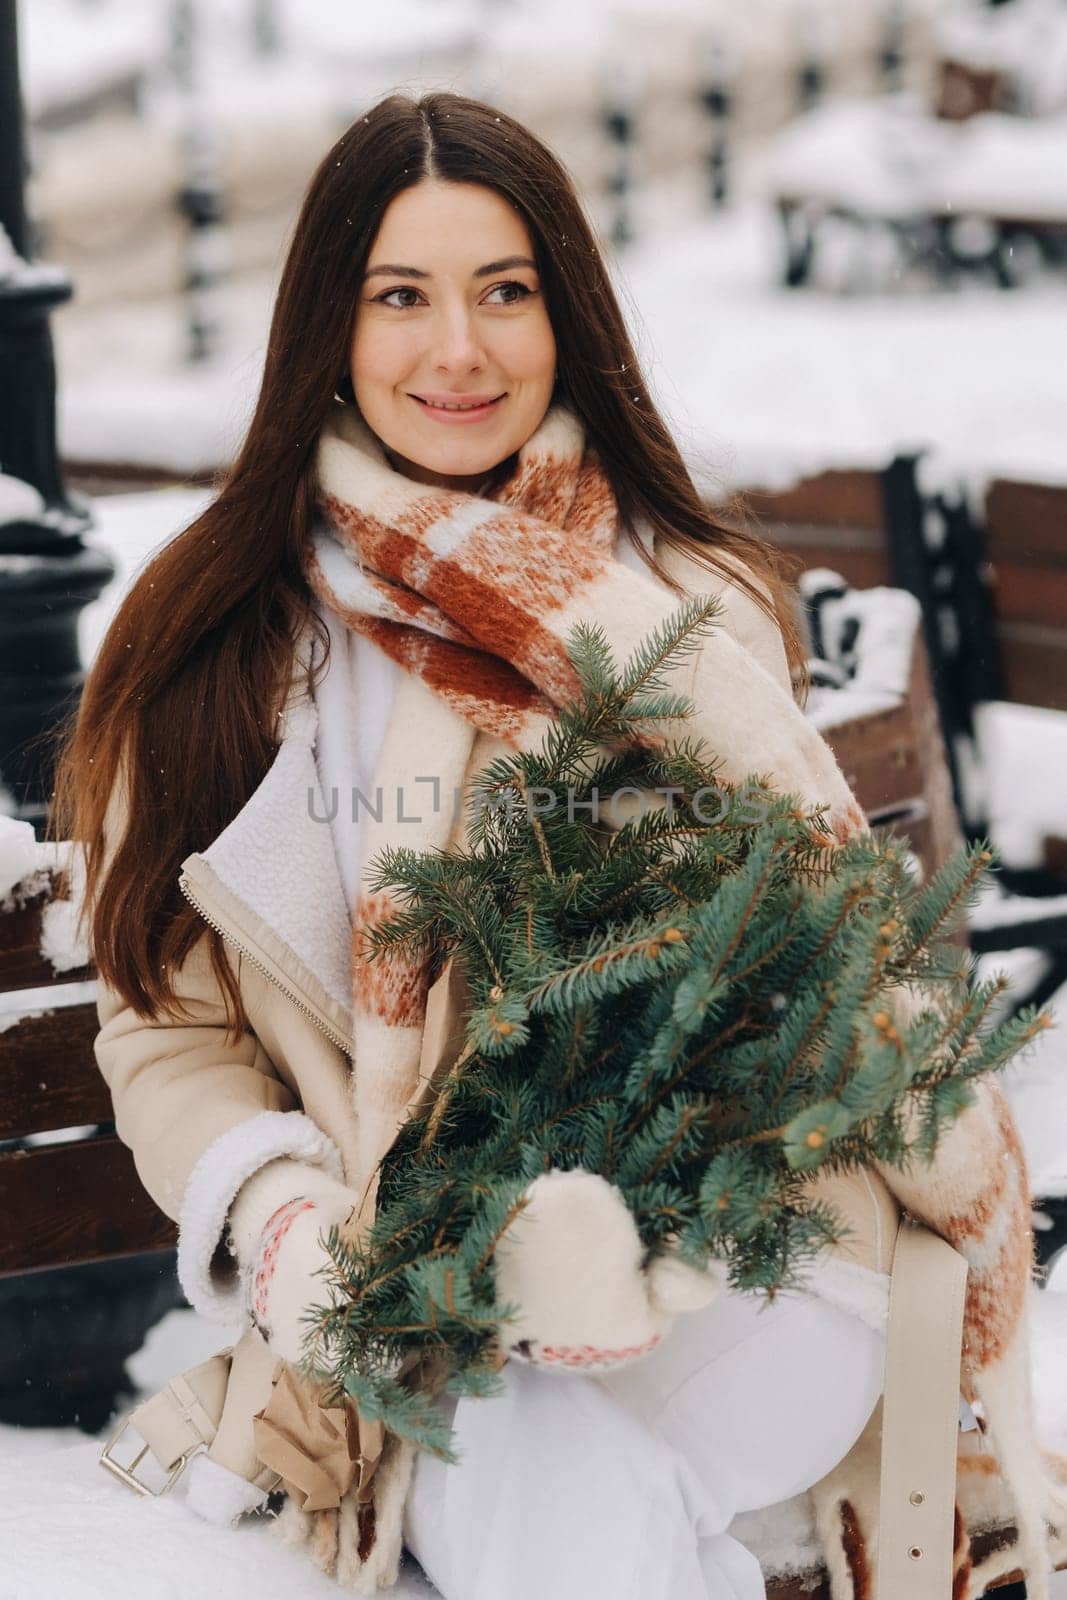 A girl with long hair in winter sits on a bench outside with a bouquet of fresh fir branches by Lobachad